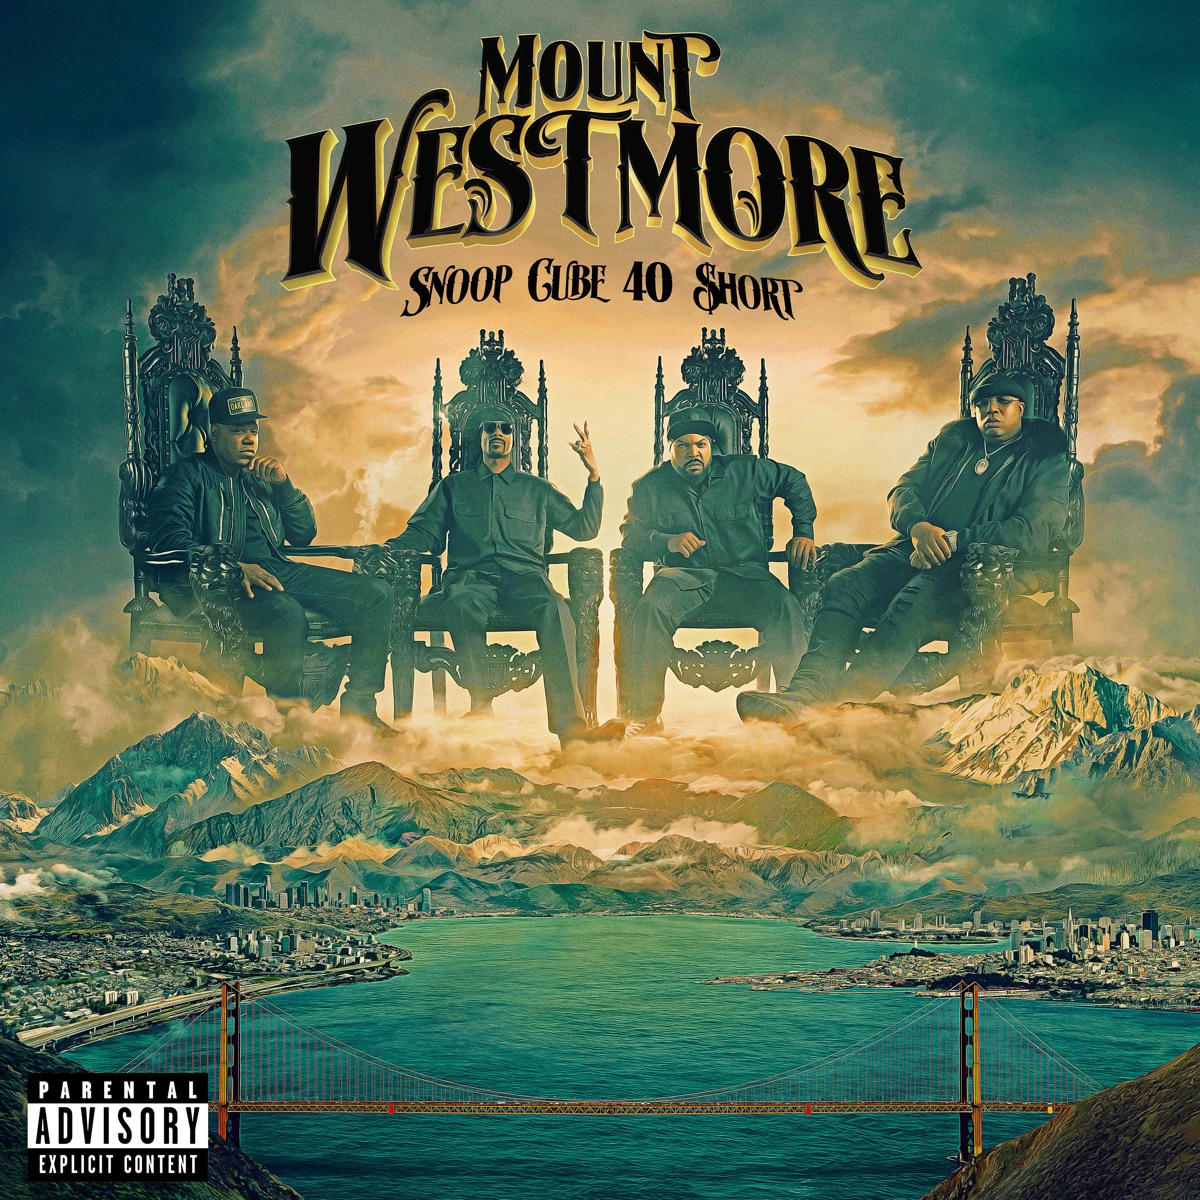 Snoop Dogg, Ice Cube, Too Short and E-40 Form Group Mt. Westmore